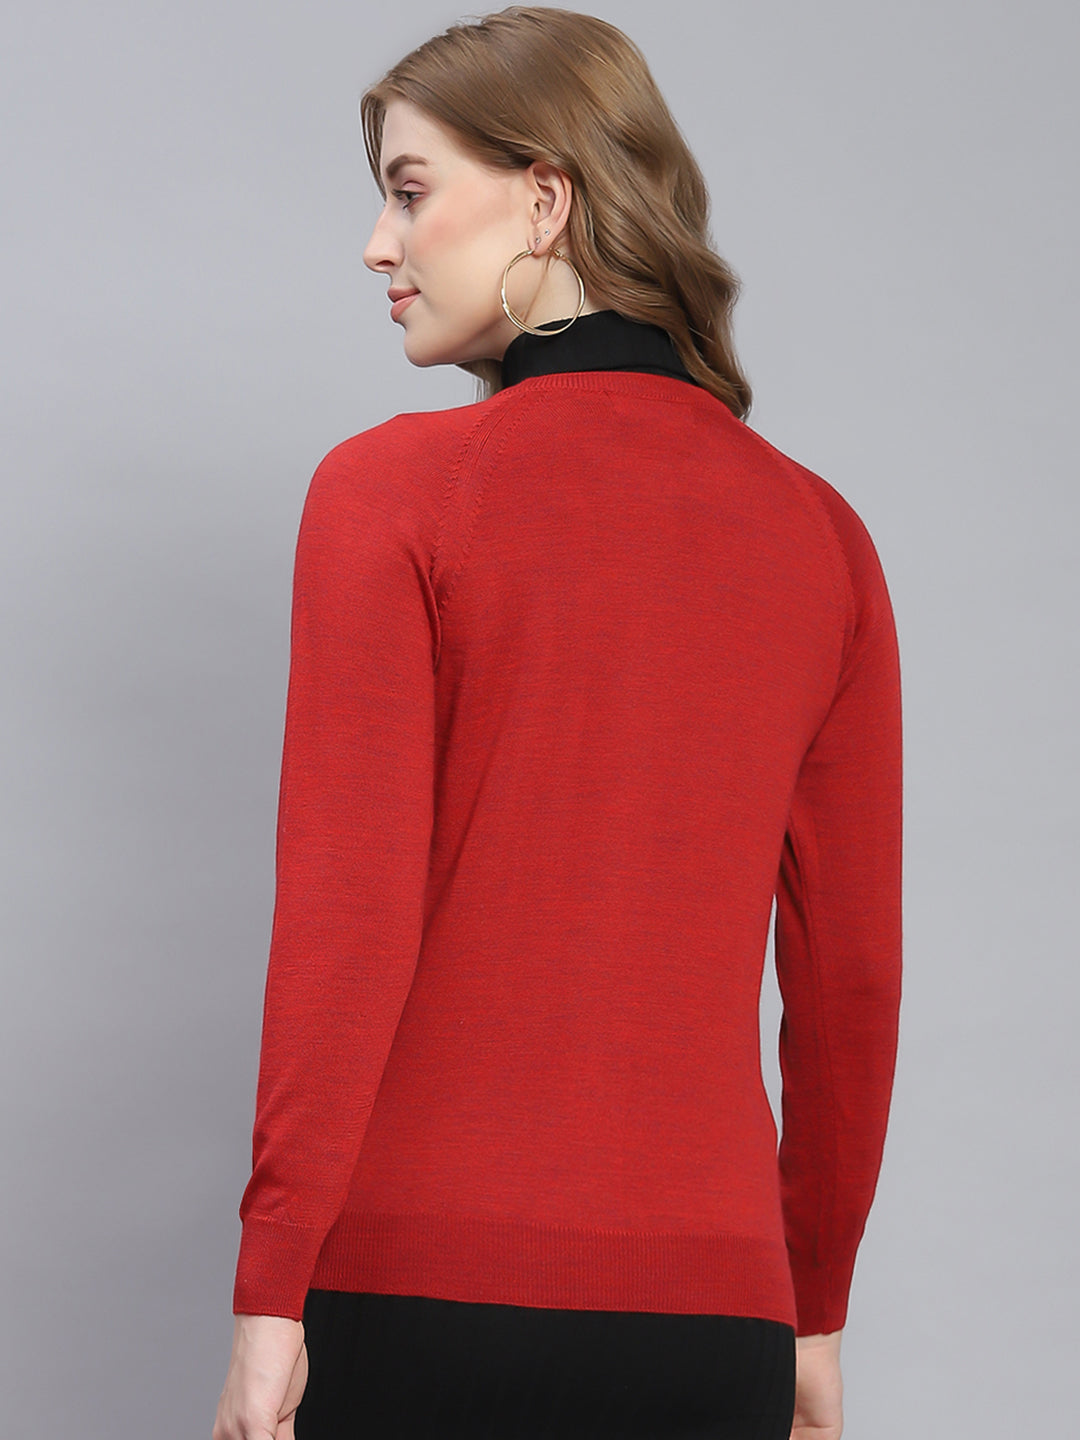 Women Red Solid Round Neck Full Sleeve Cardigans